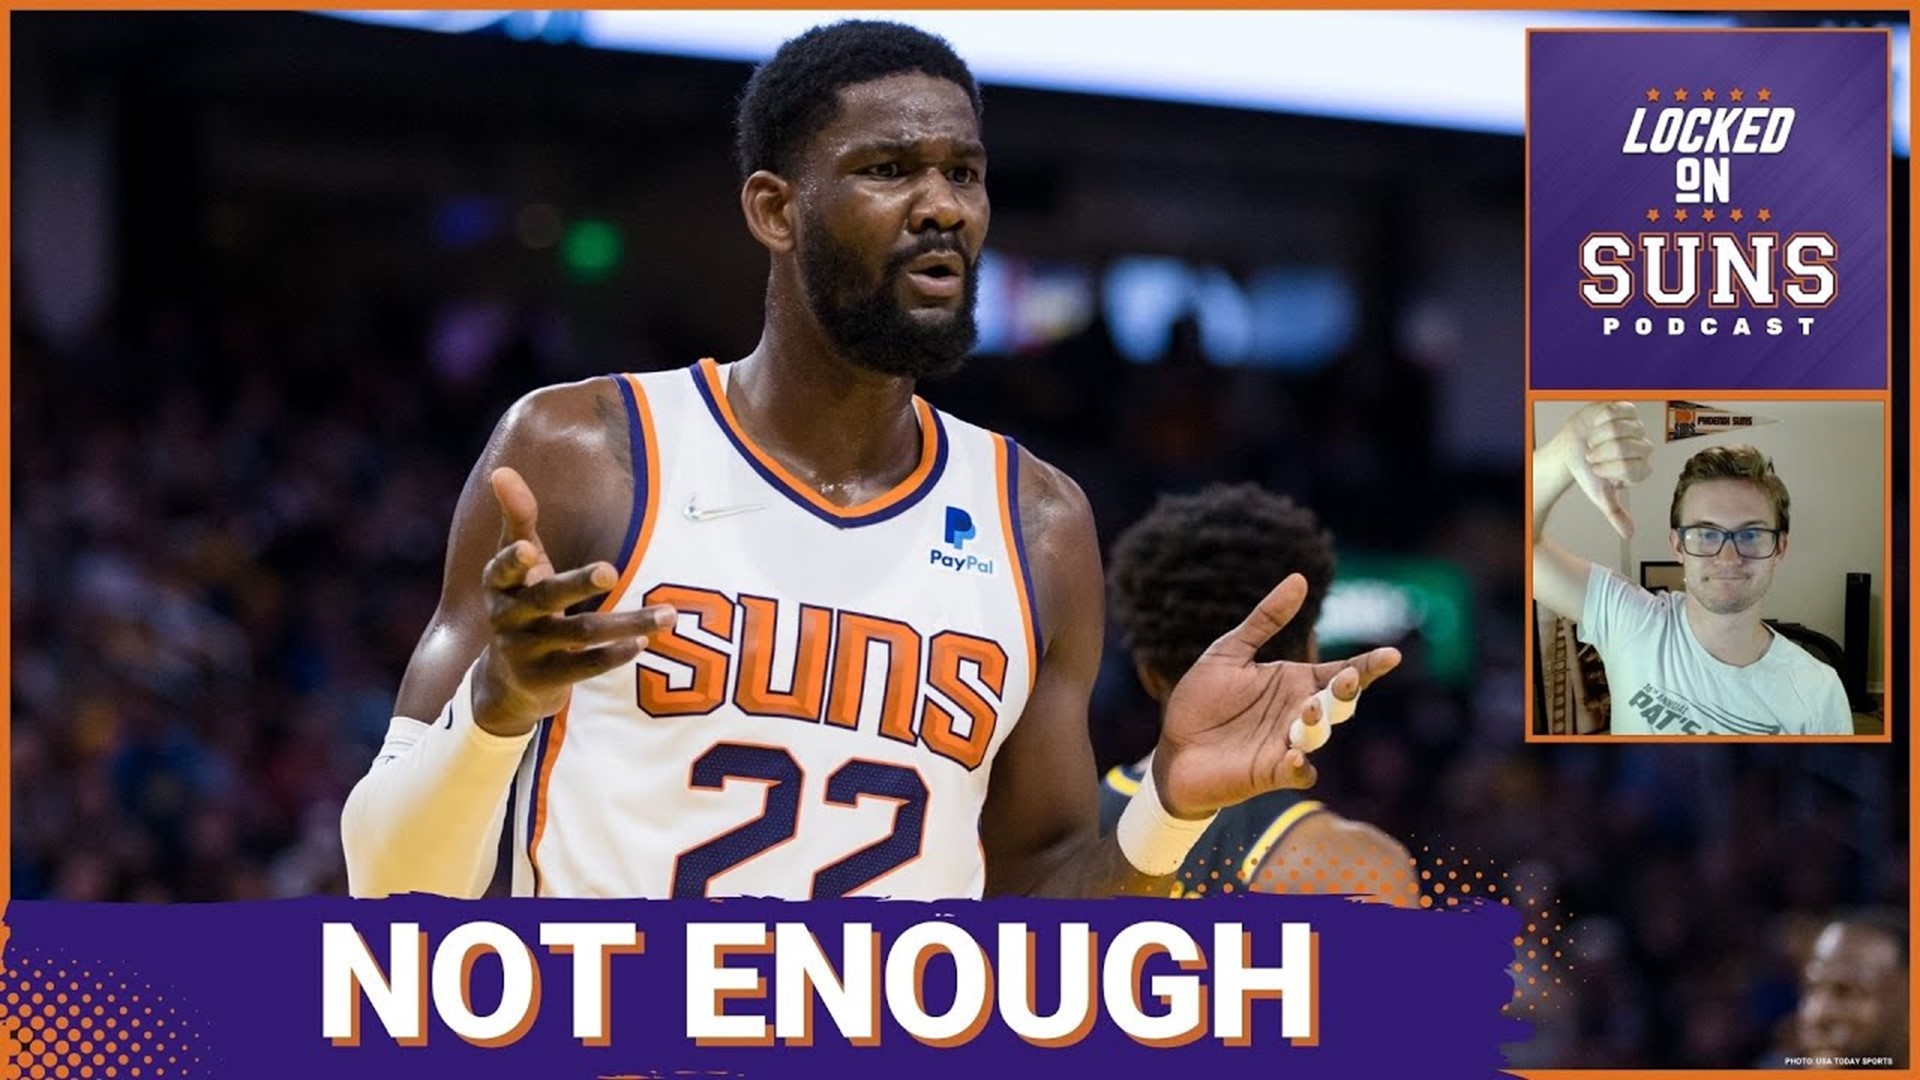 A late Phoenix Suns comeback wasn't enough in a loss to the Warriors, despite Devin Booker going for 32 and Deandre Ayton getting 27.